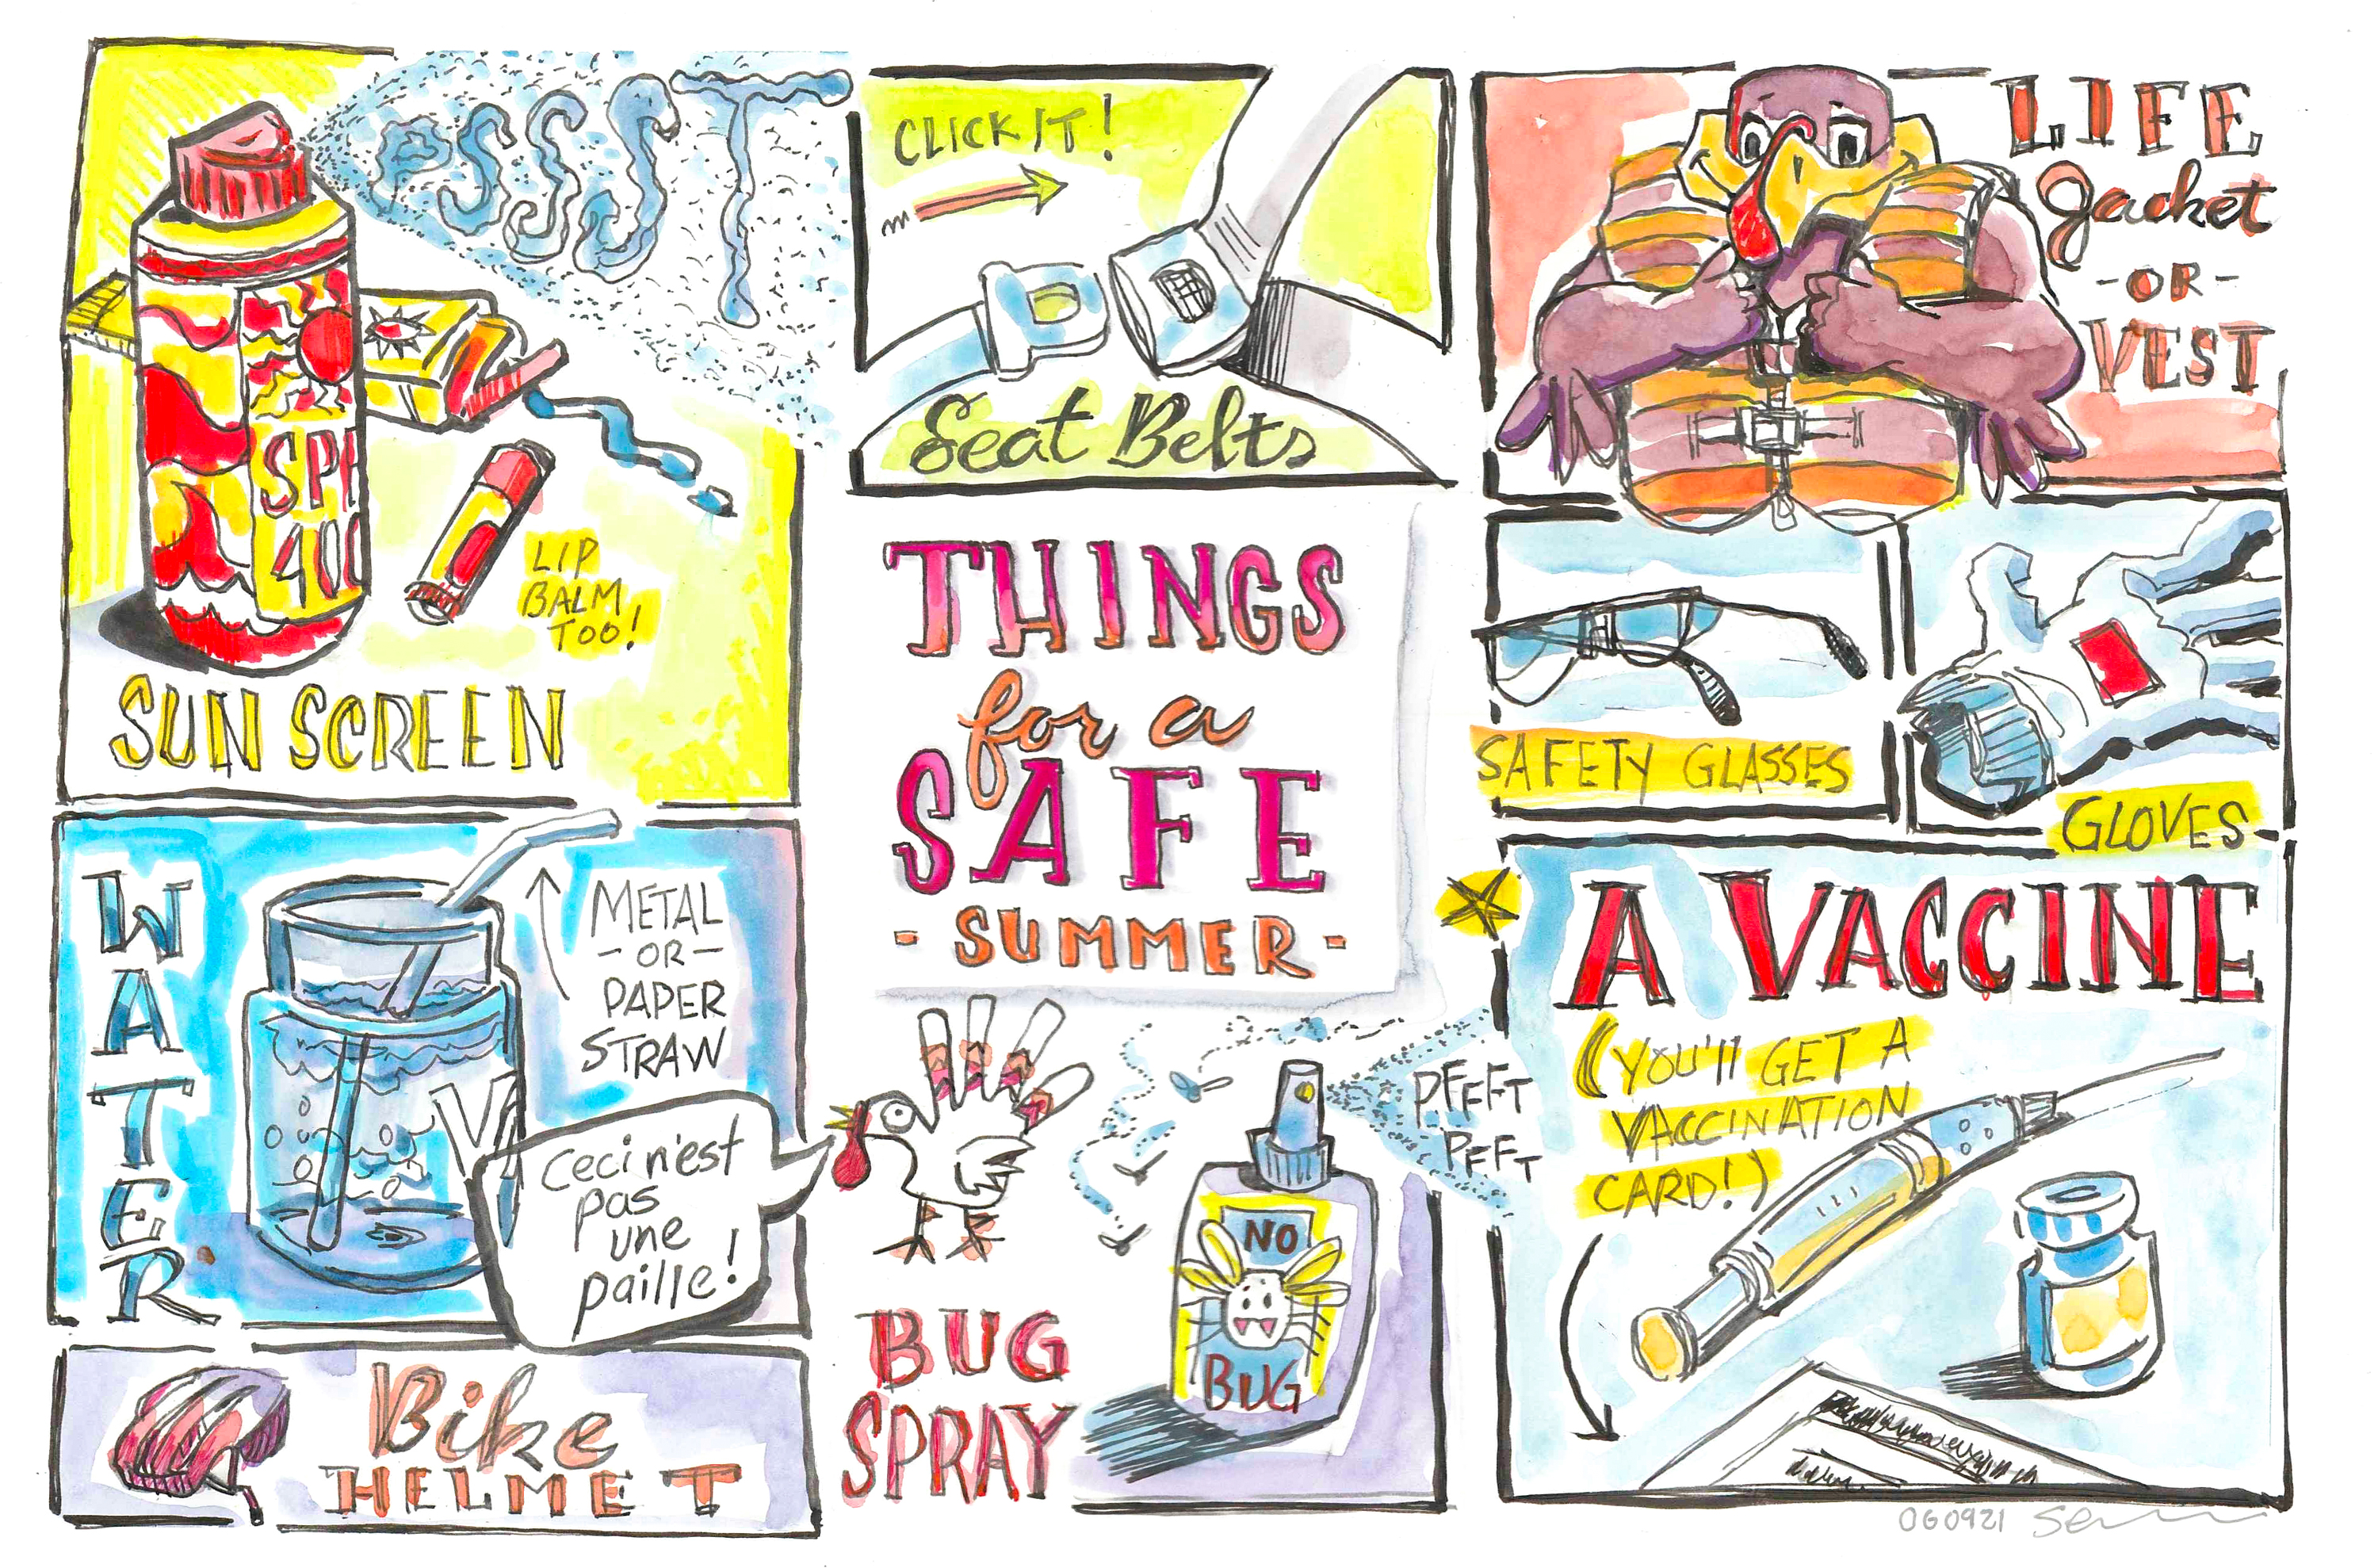 Illustrated panels in ink and watercolor of things one can use to be safe this summer: sun screen, water, bike helmet, seat belts, bug spray, life jackets, safety glasses, gloves, and a vaccine